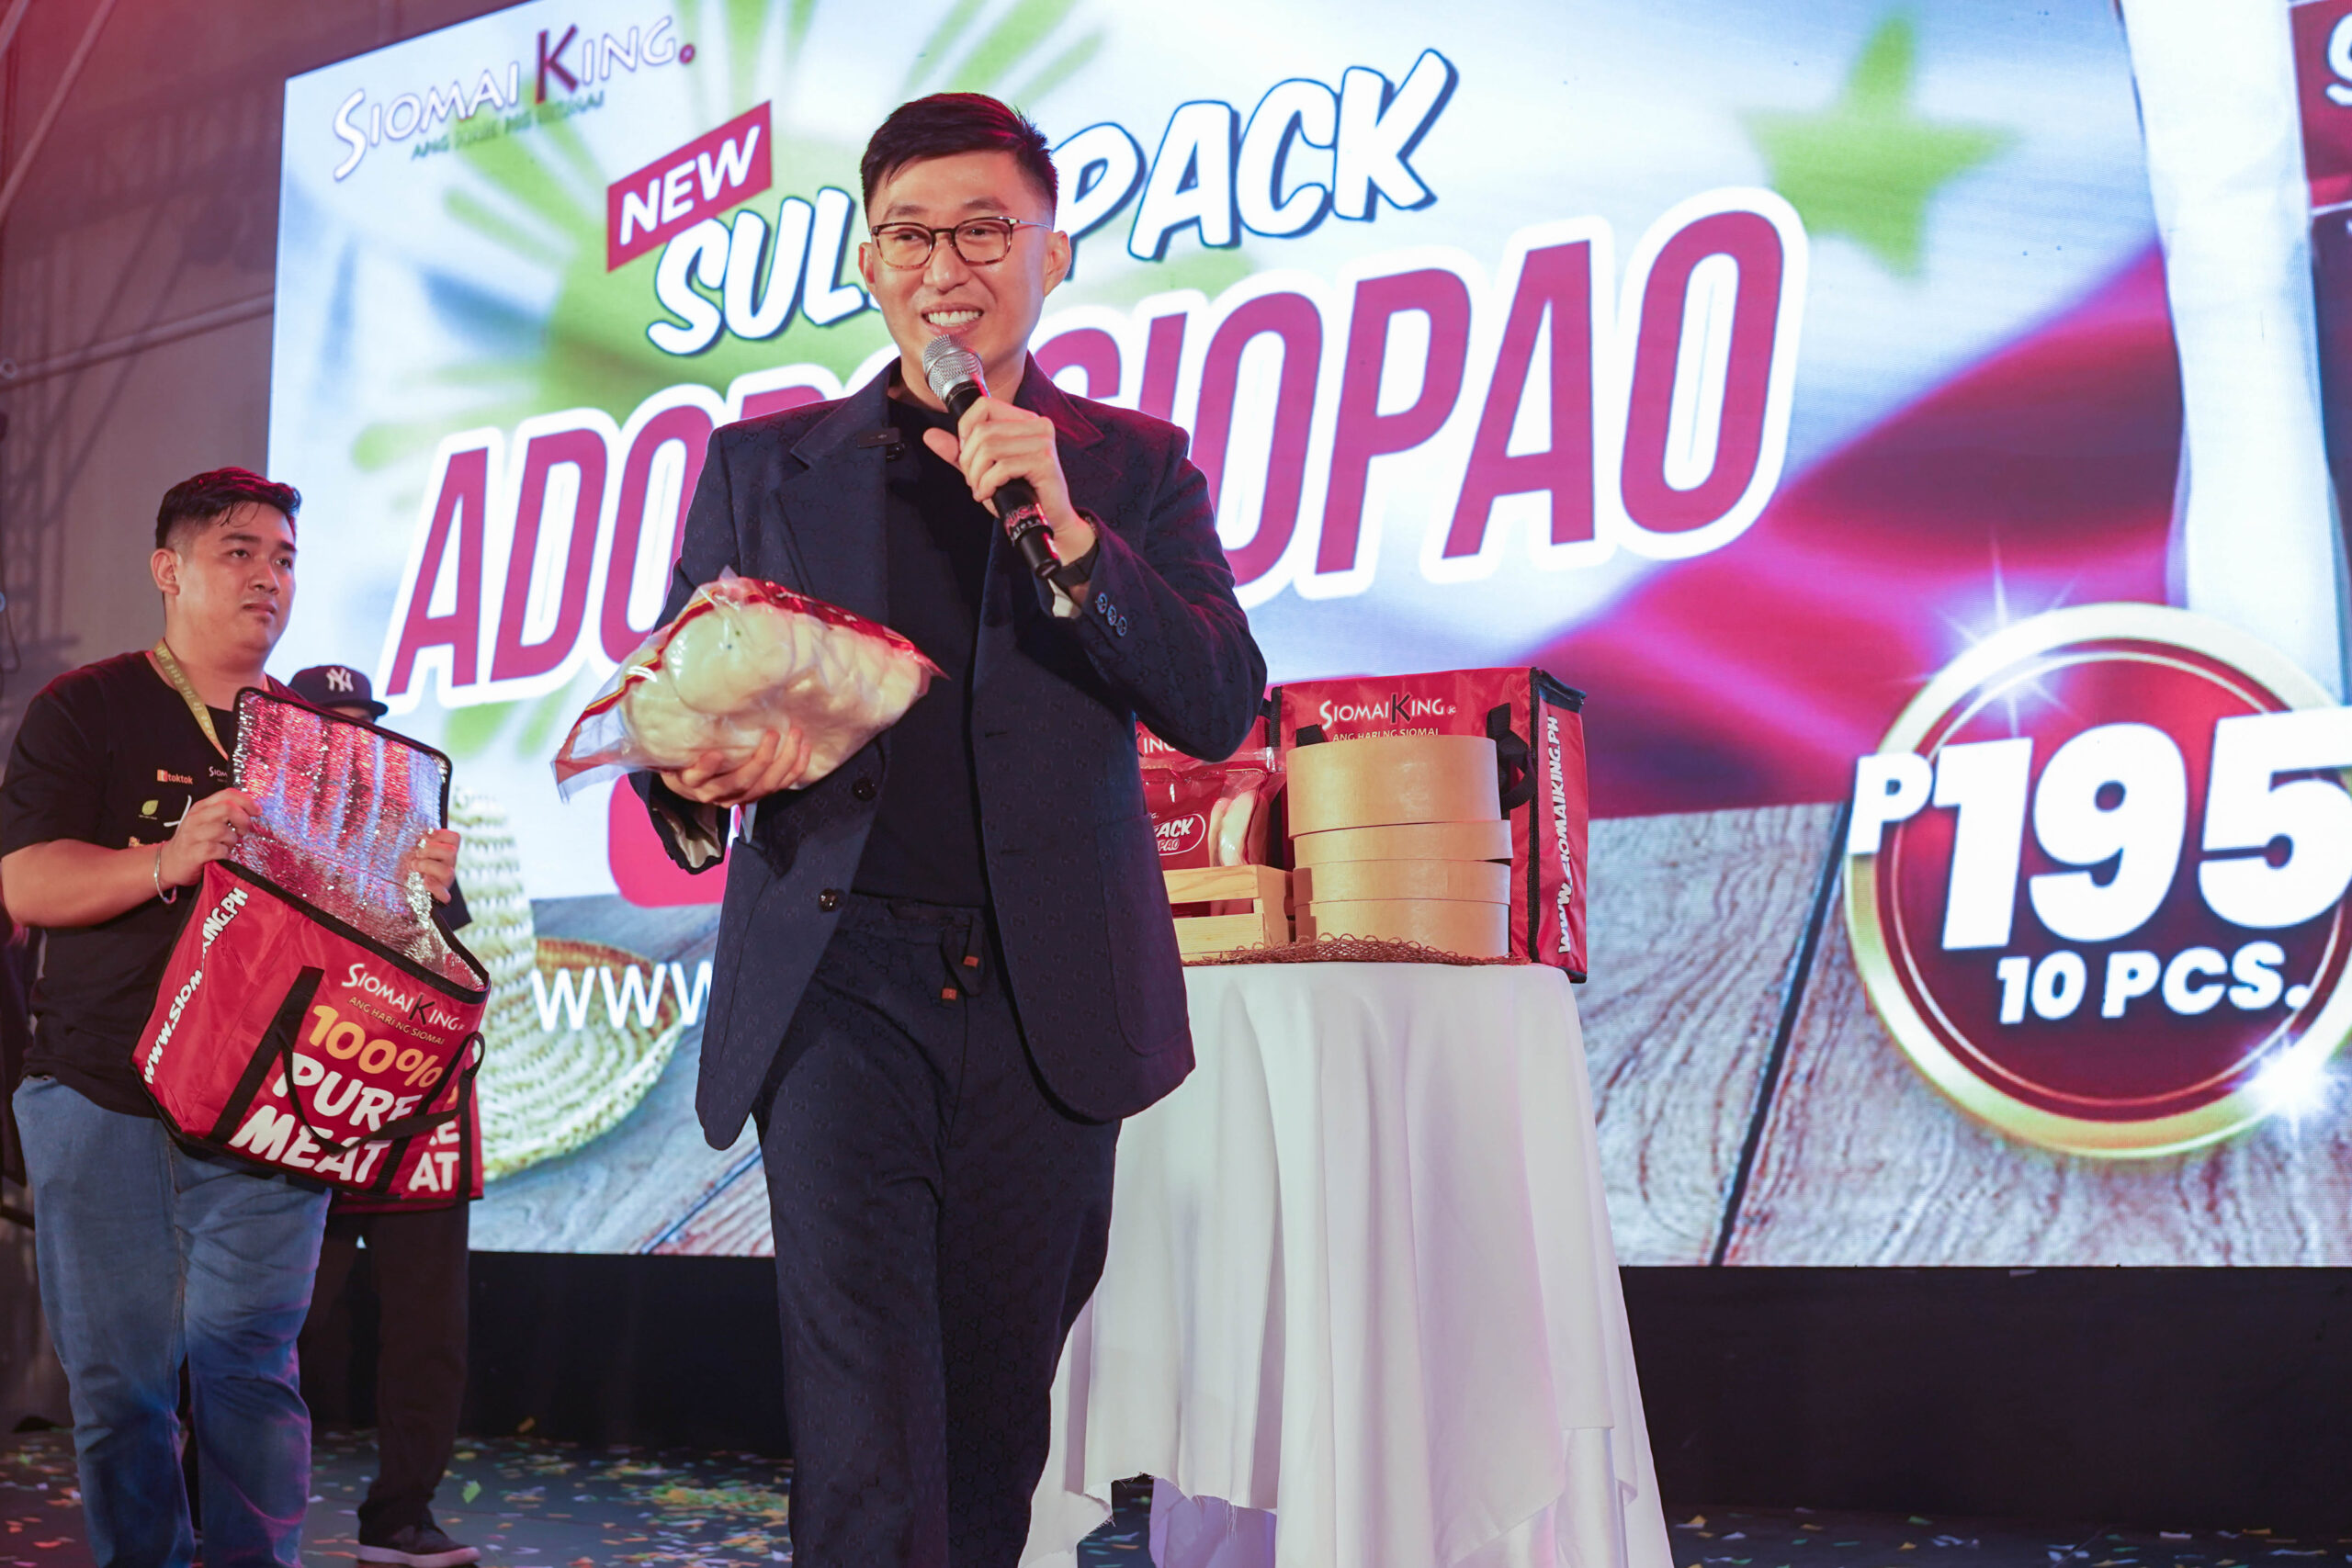 Siomai King wins Franchising Hall of Famer of the Year at Asia Leaders Awards